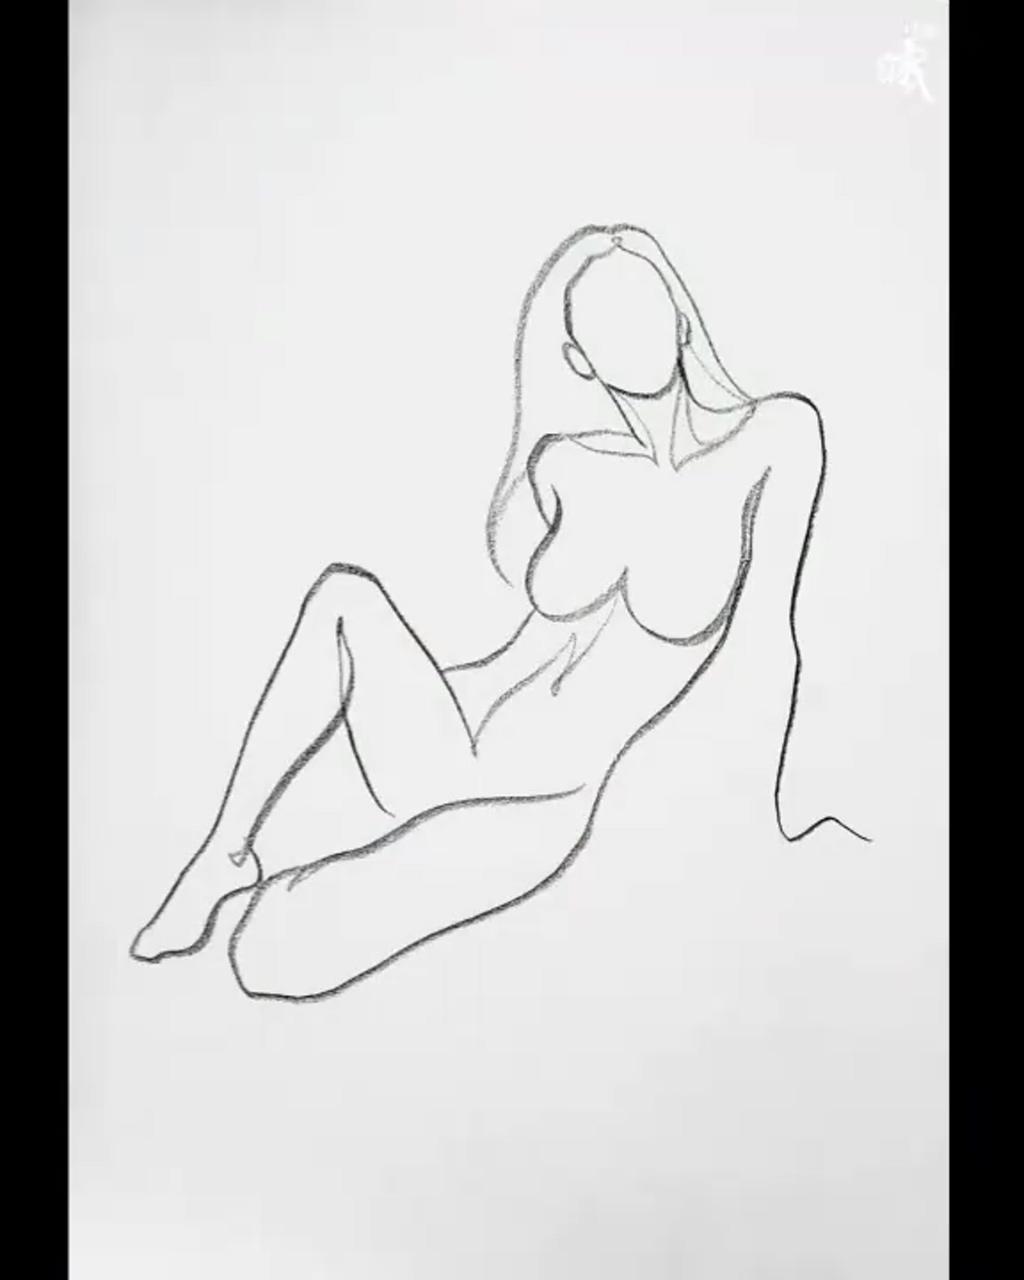 How to draw a woman sitting on the floor with line art | continuous line drawing